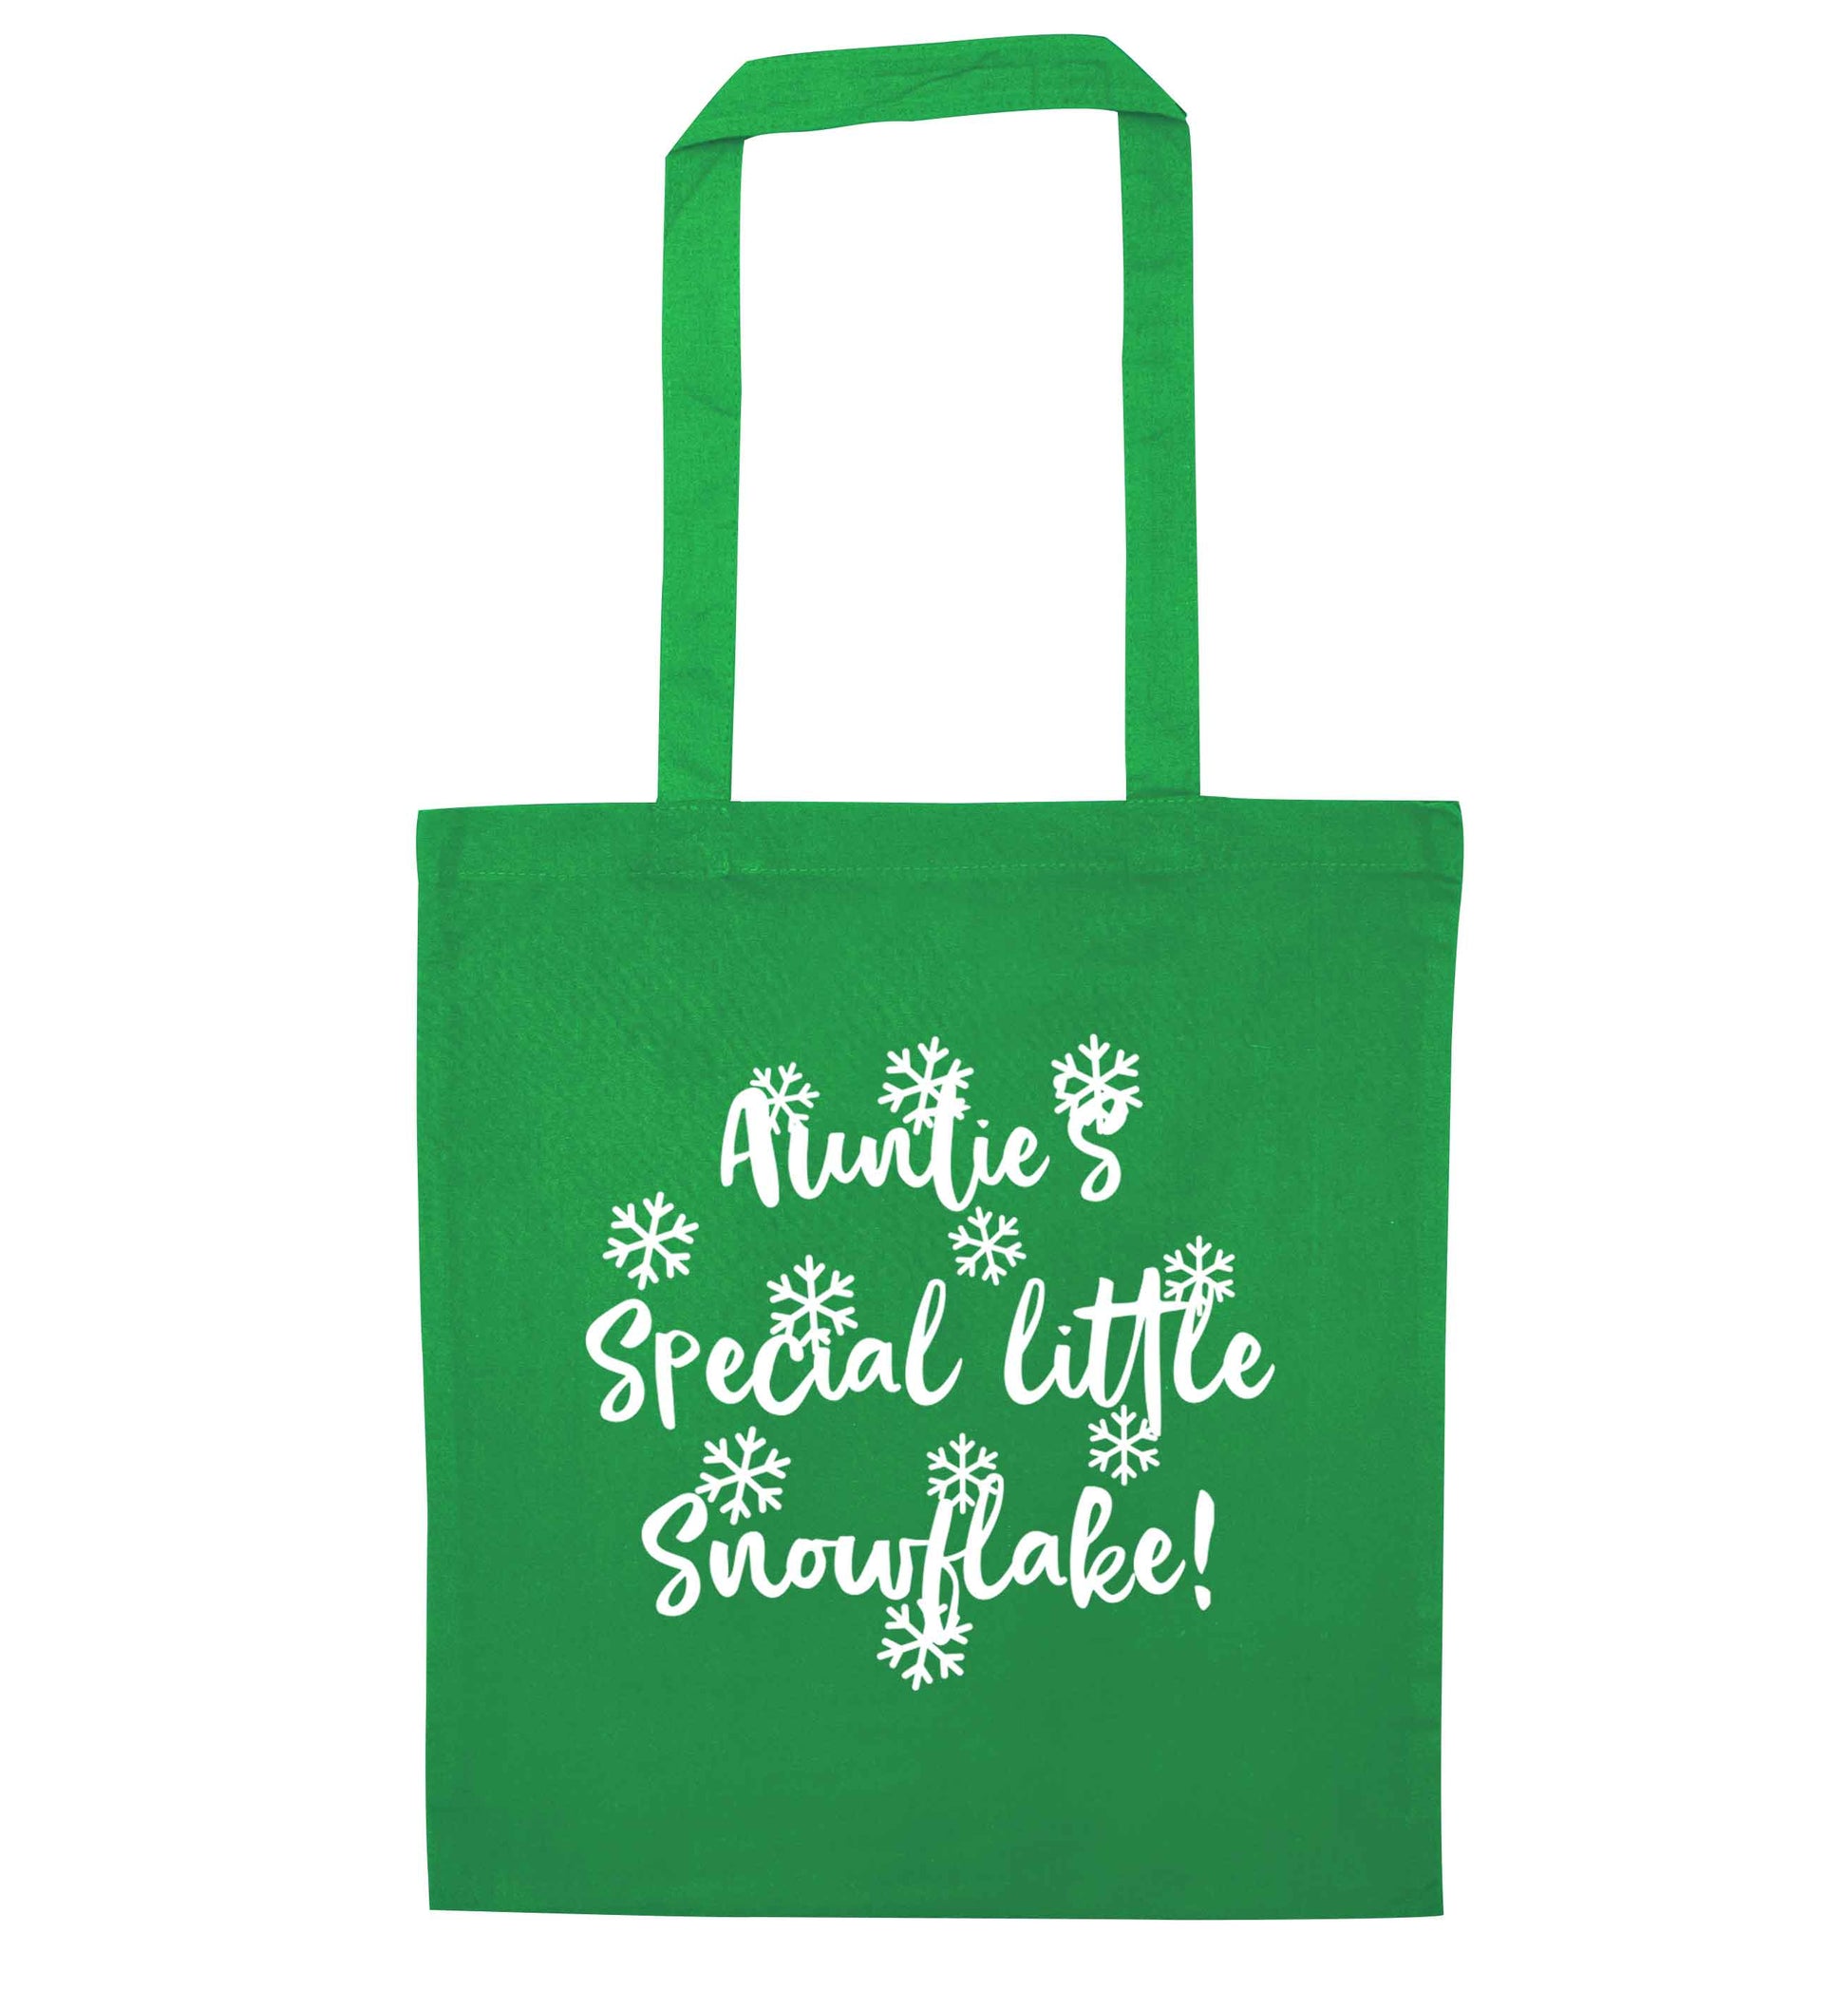 Auntie's special little snowflake green tote bag